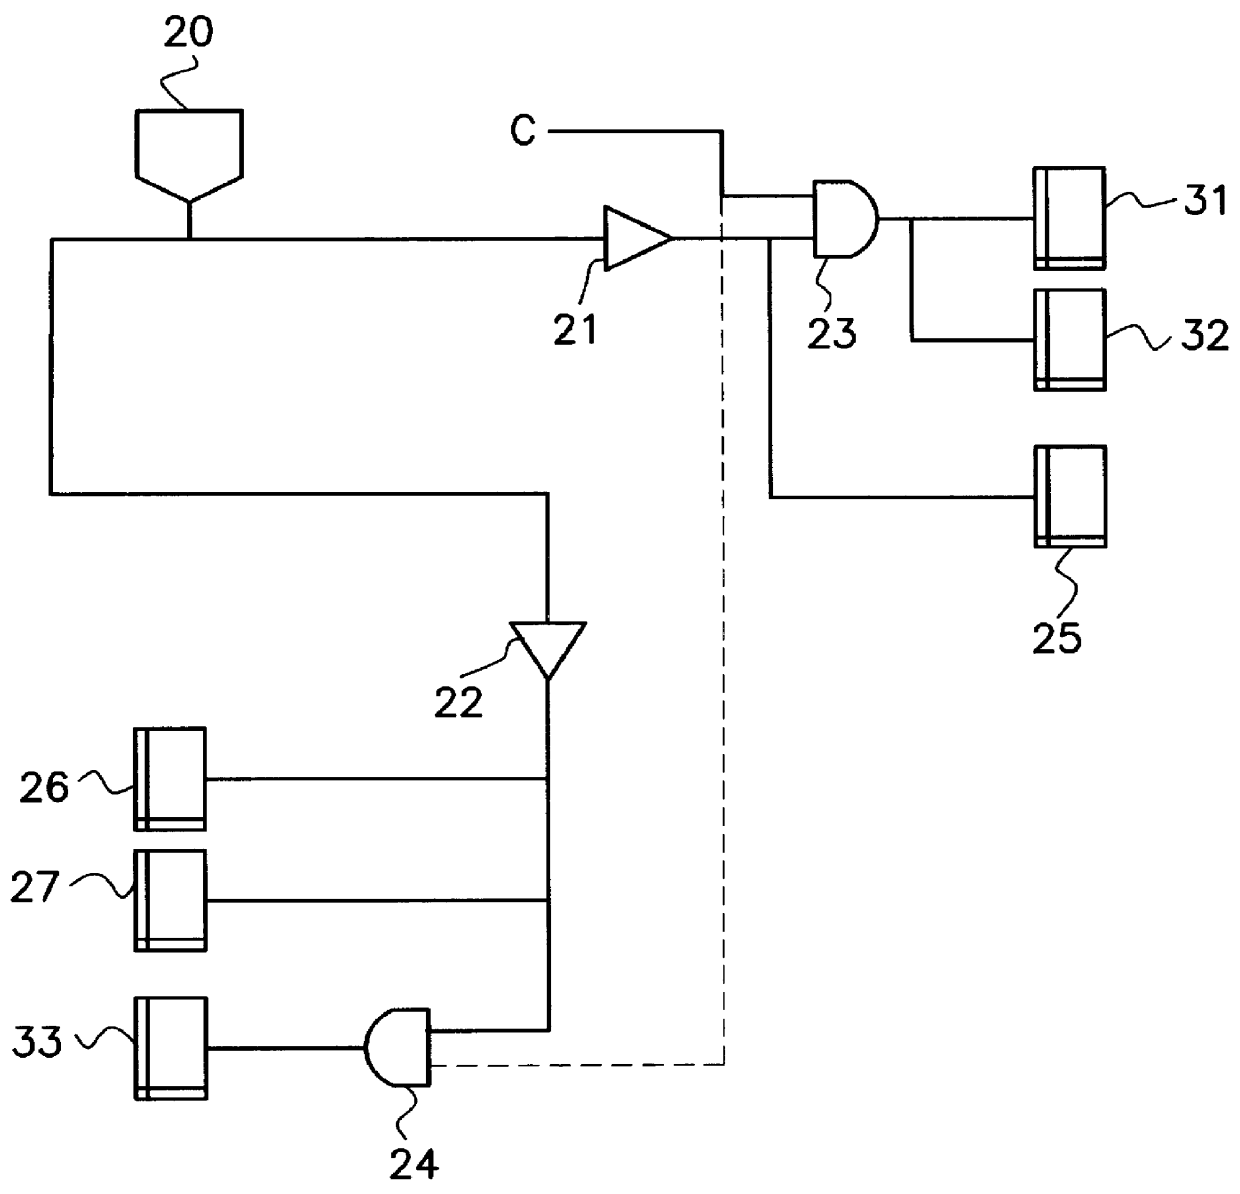 Gated clock tree synthesis method for the logic design